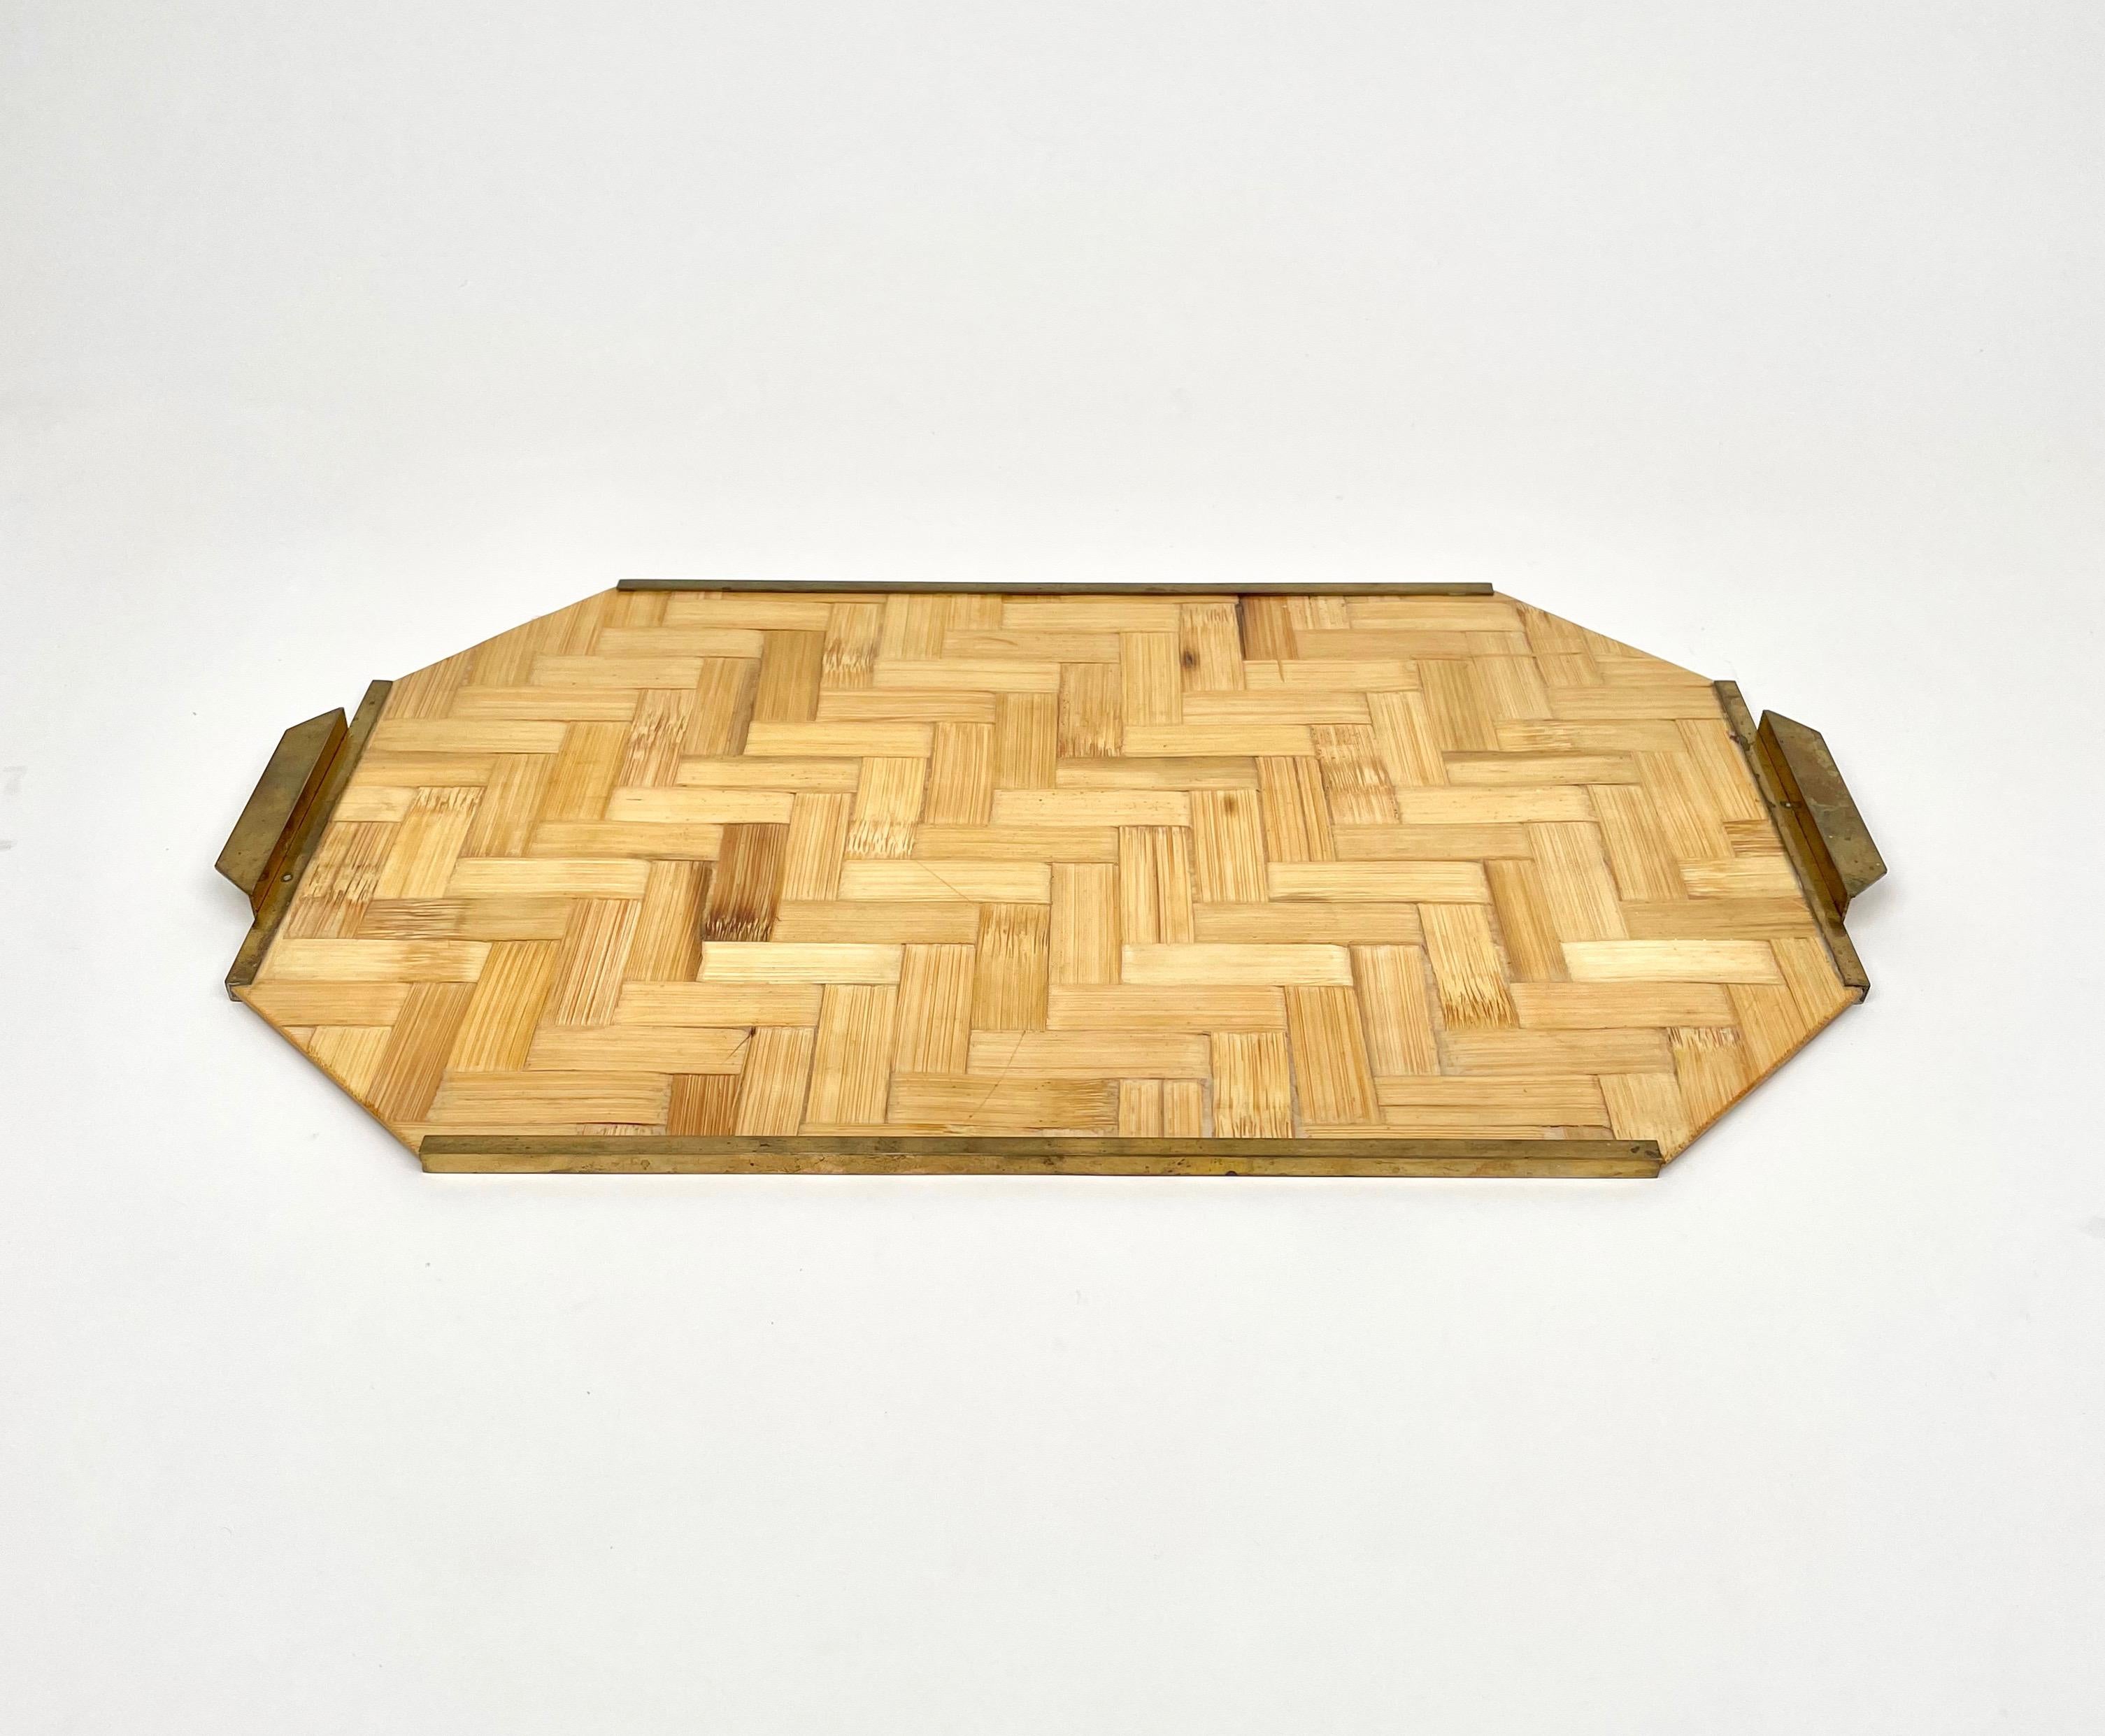 Serving tray in rattan bamboo with brass details and handles made in Italy in the 1970s.